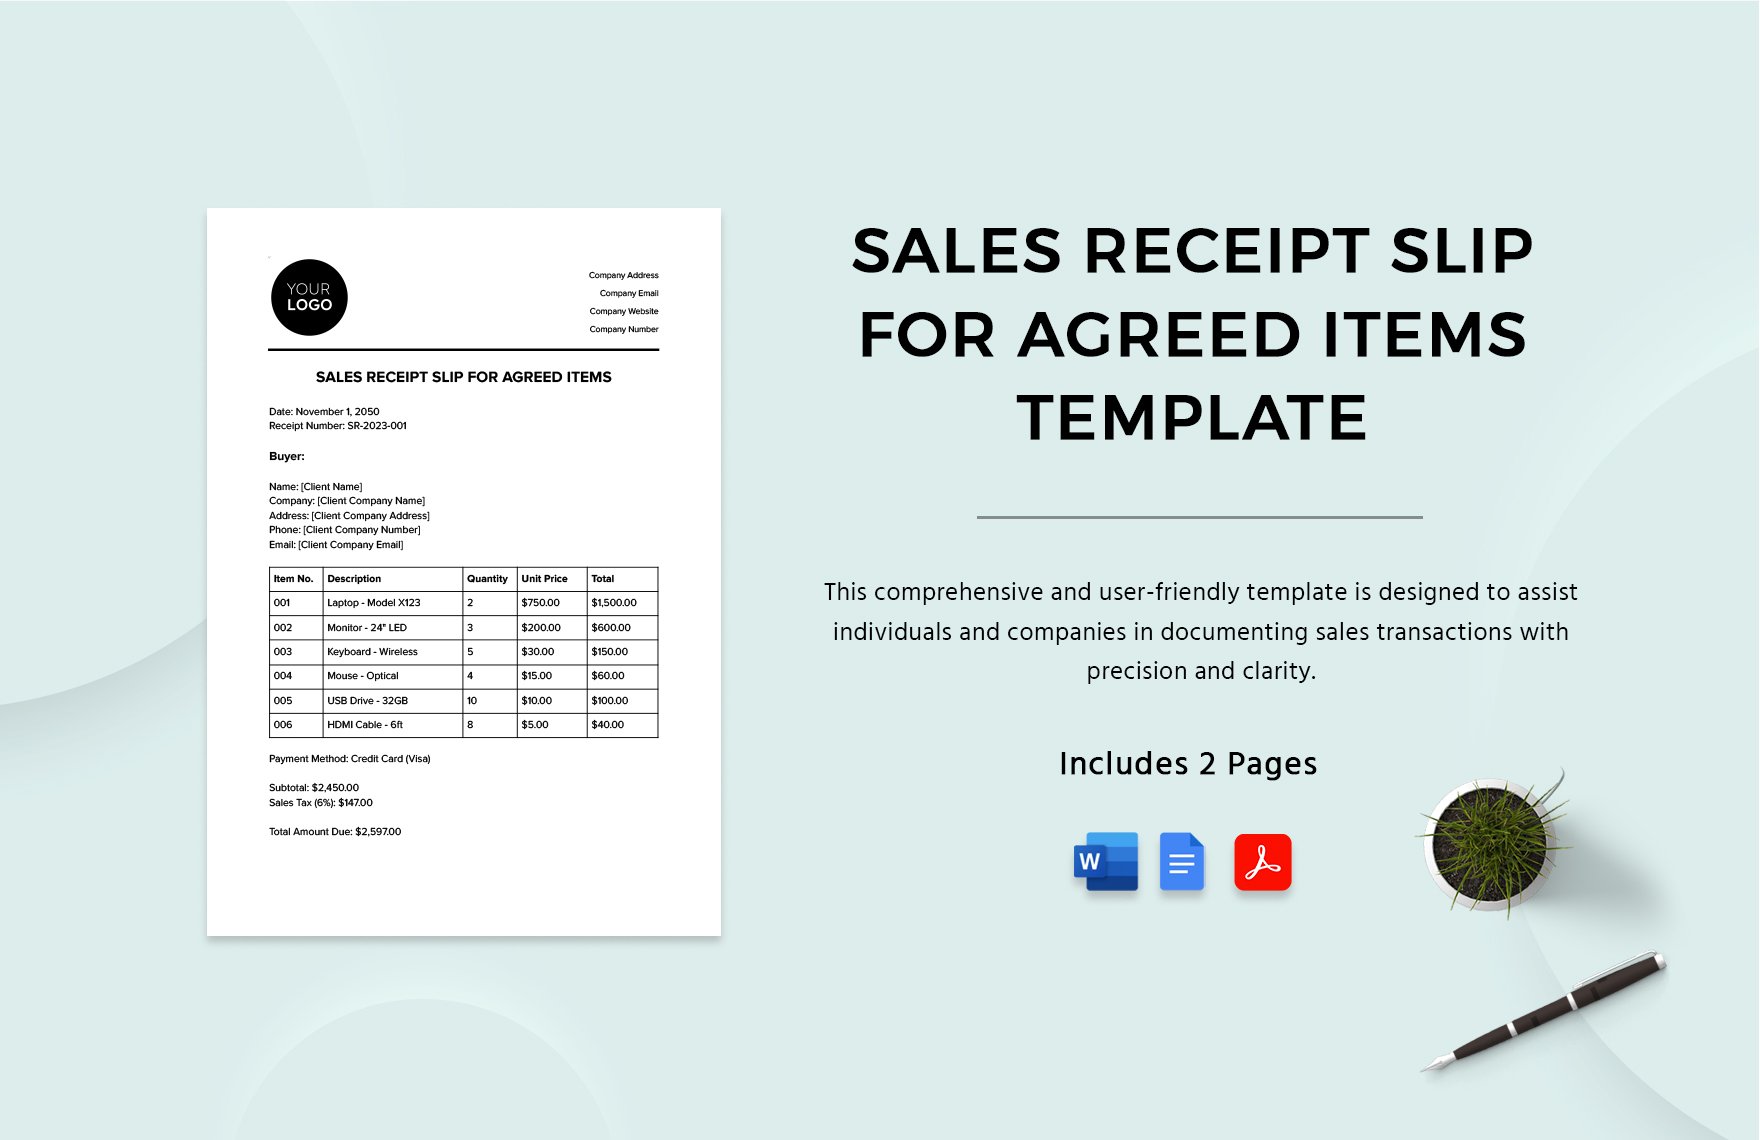 Sales Receipt Slip for Agreed Items Template